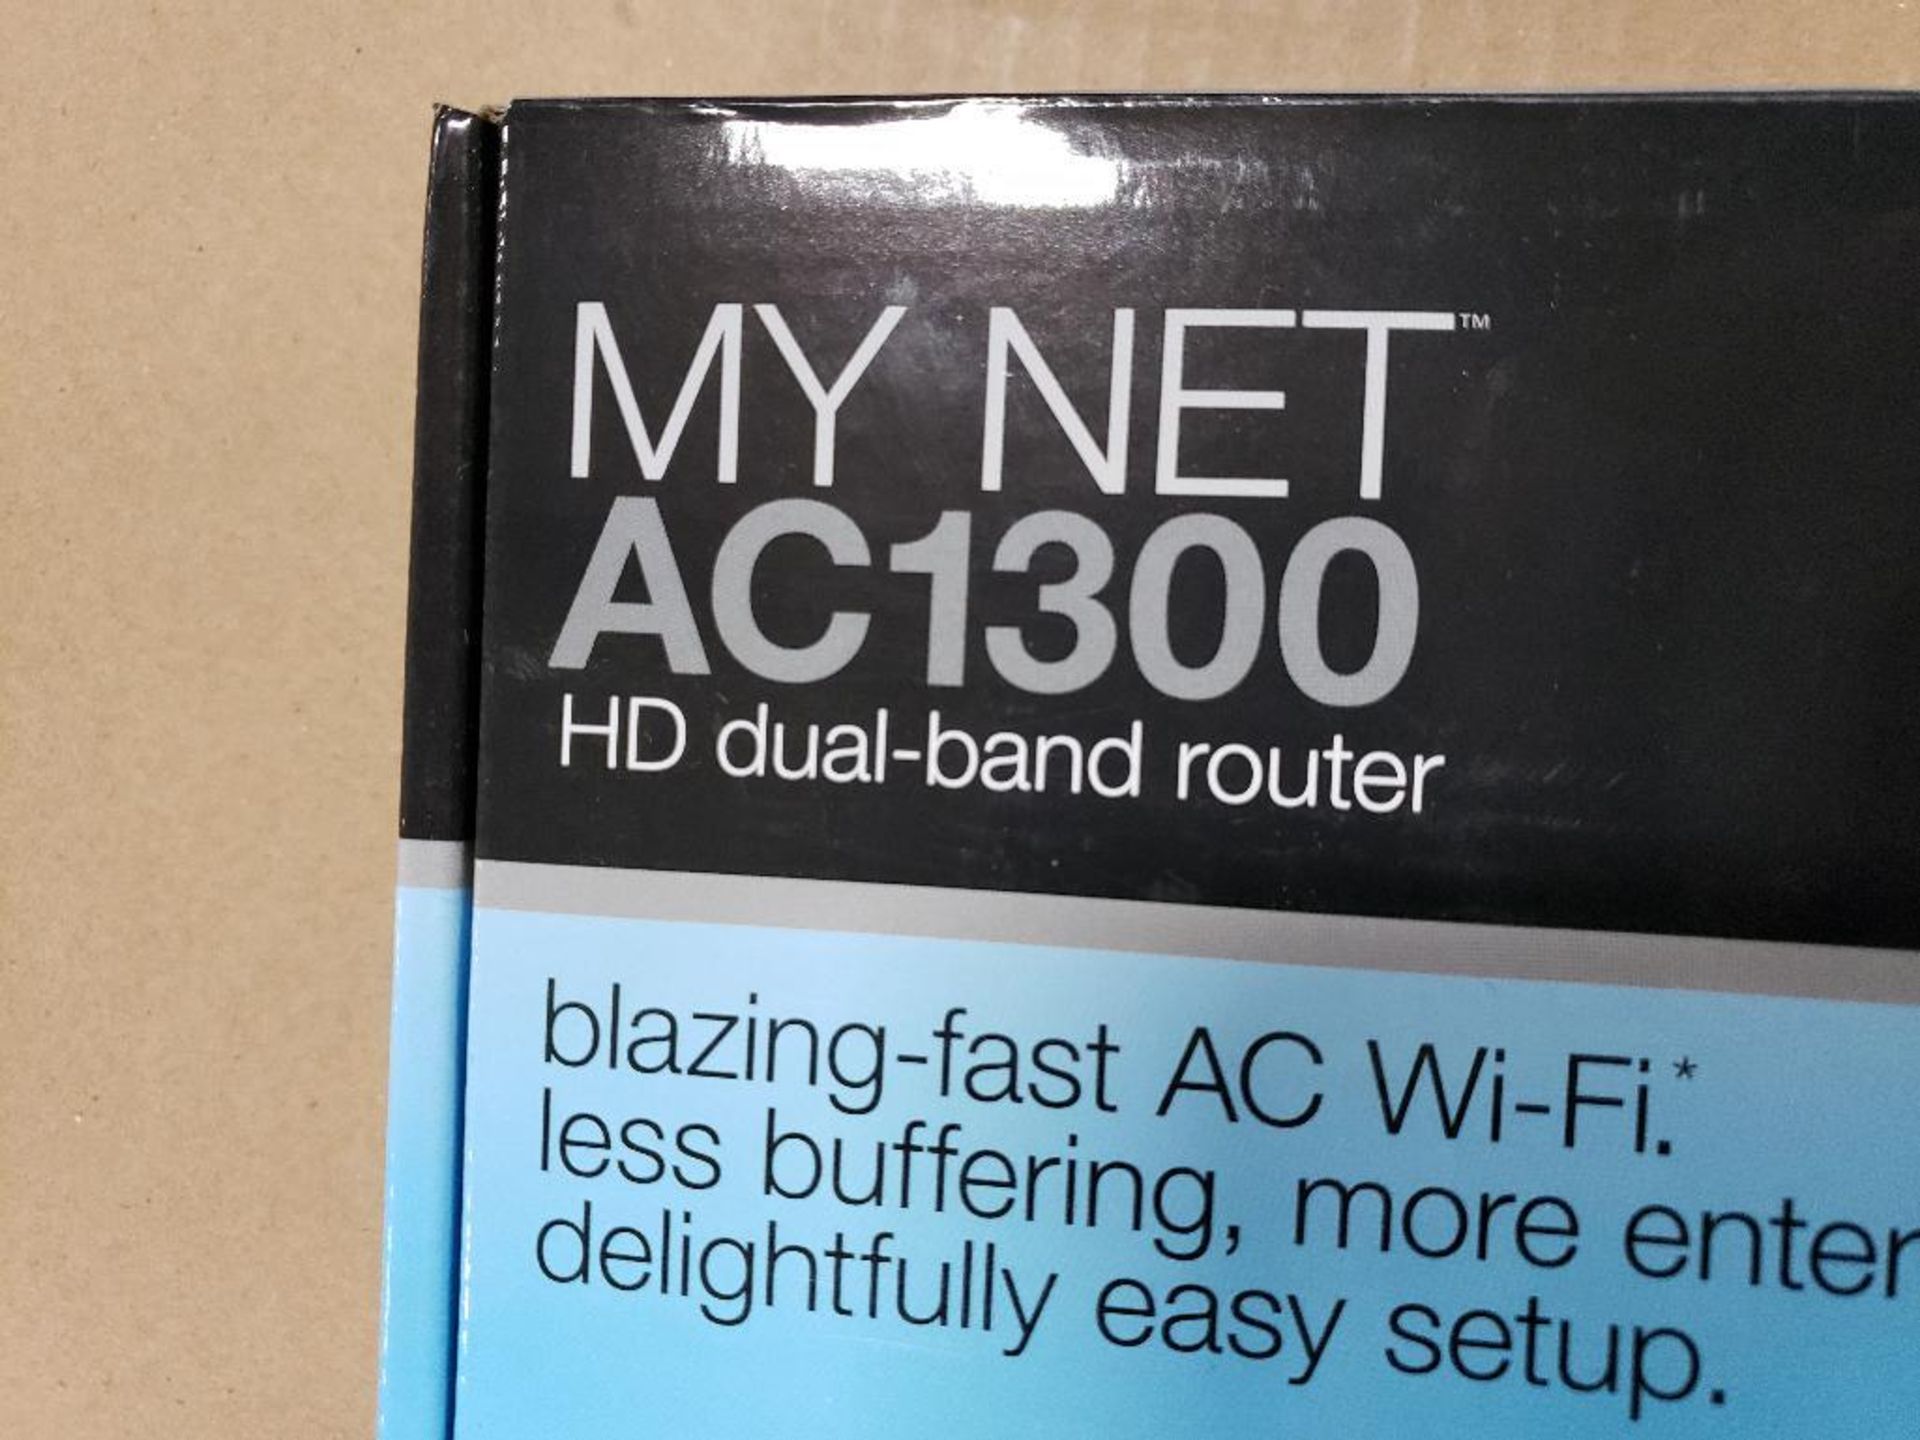 WD My Net AC1300 dual-band HD router. - Image 3 of 9